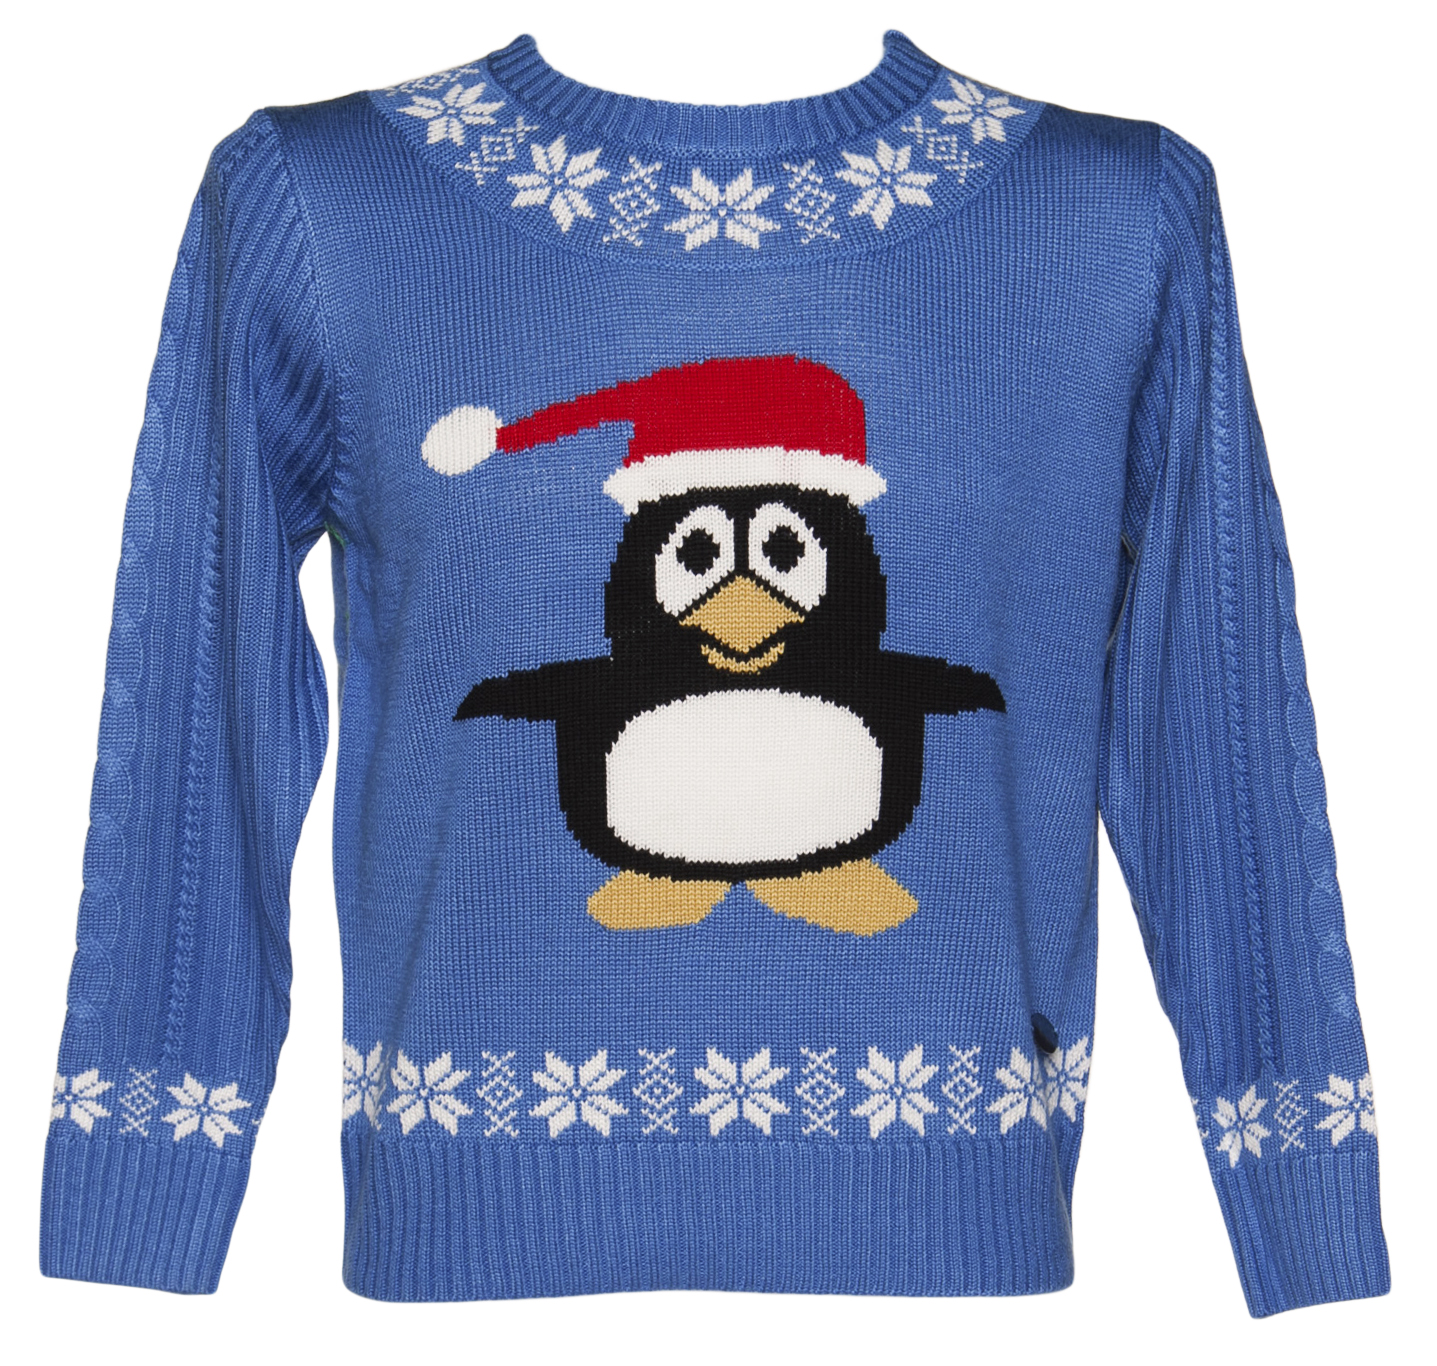 Crazy Granny Clothing Unisex Percy Penguin Christmas Jumper from Crazy